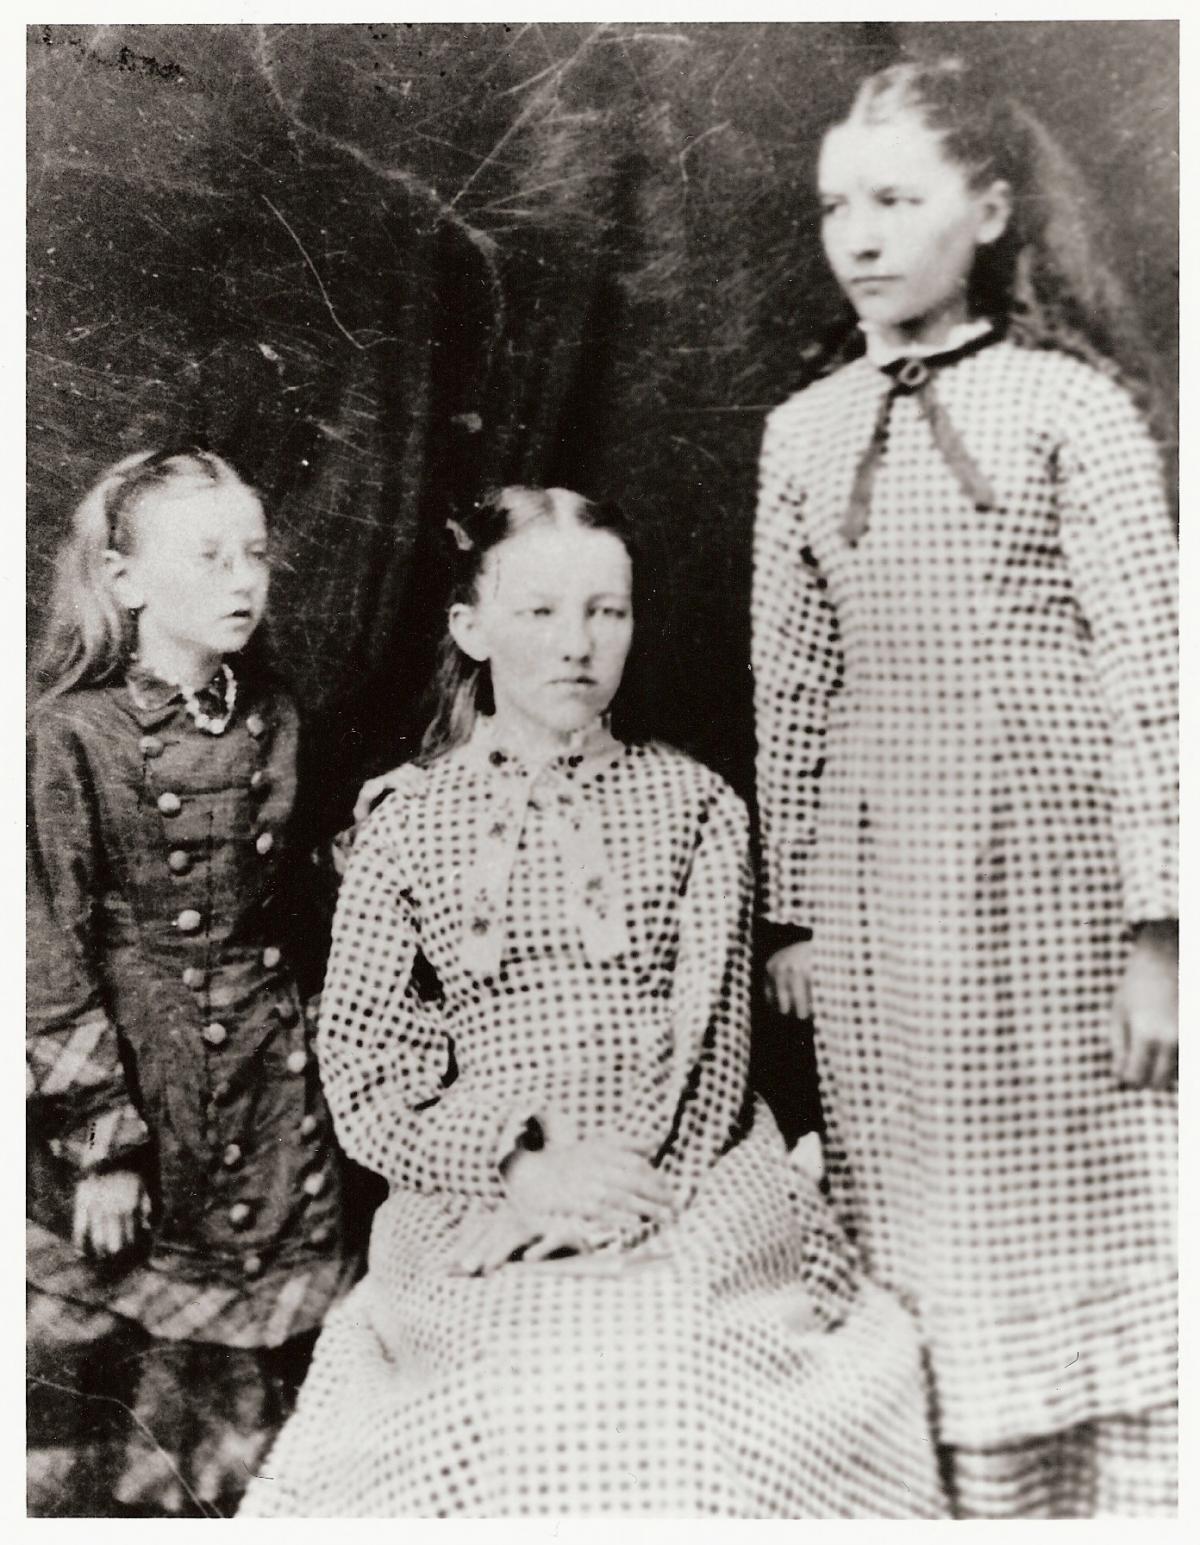 Black and white photograph of three young girls, two seated and one standing, in checkered and buttoned dresses